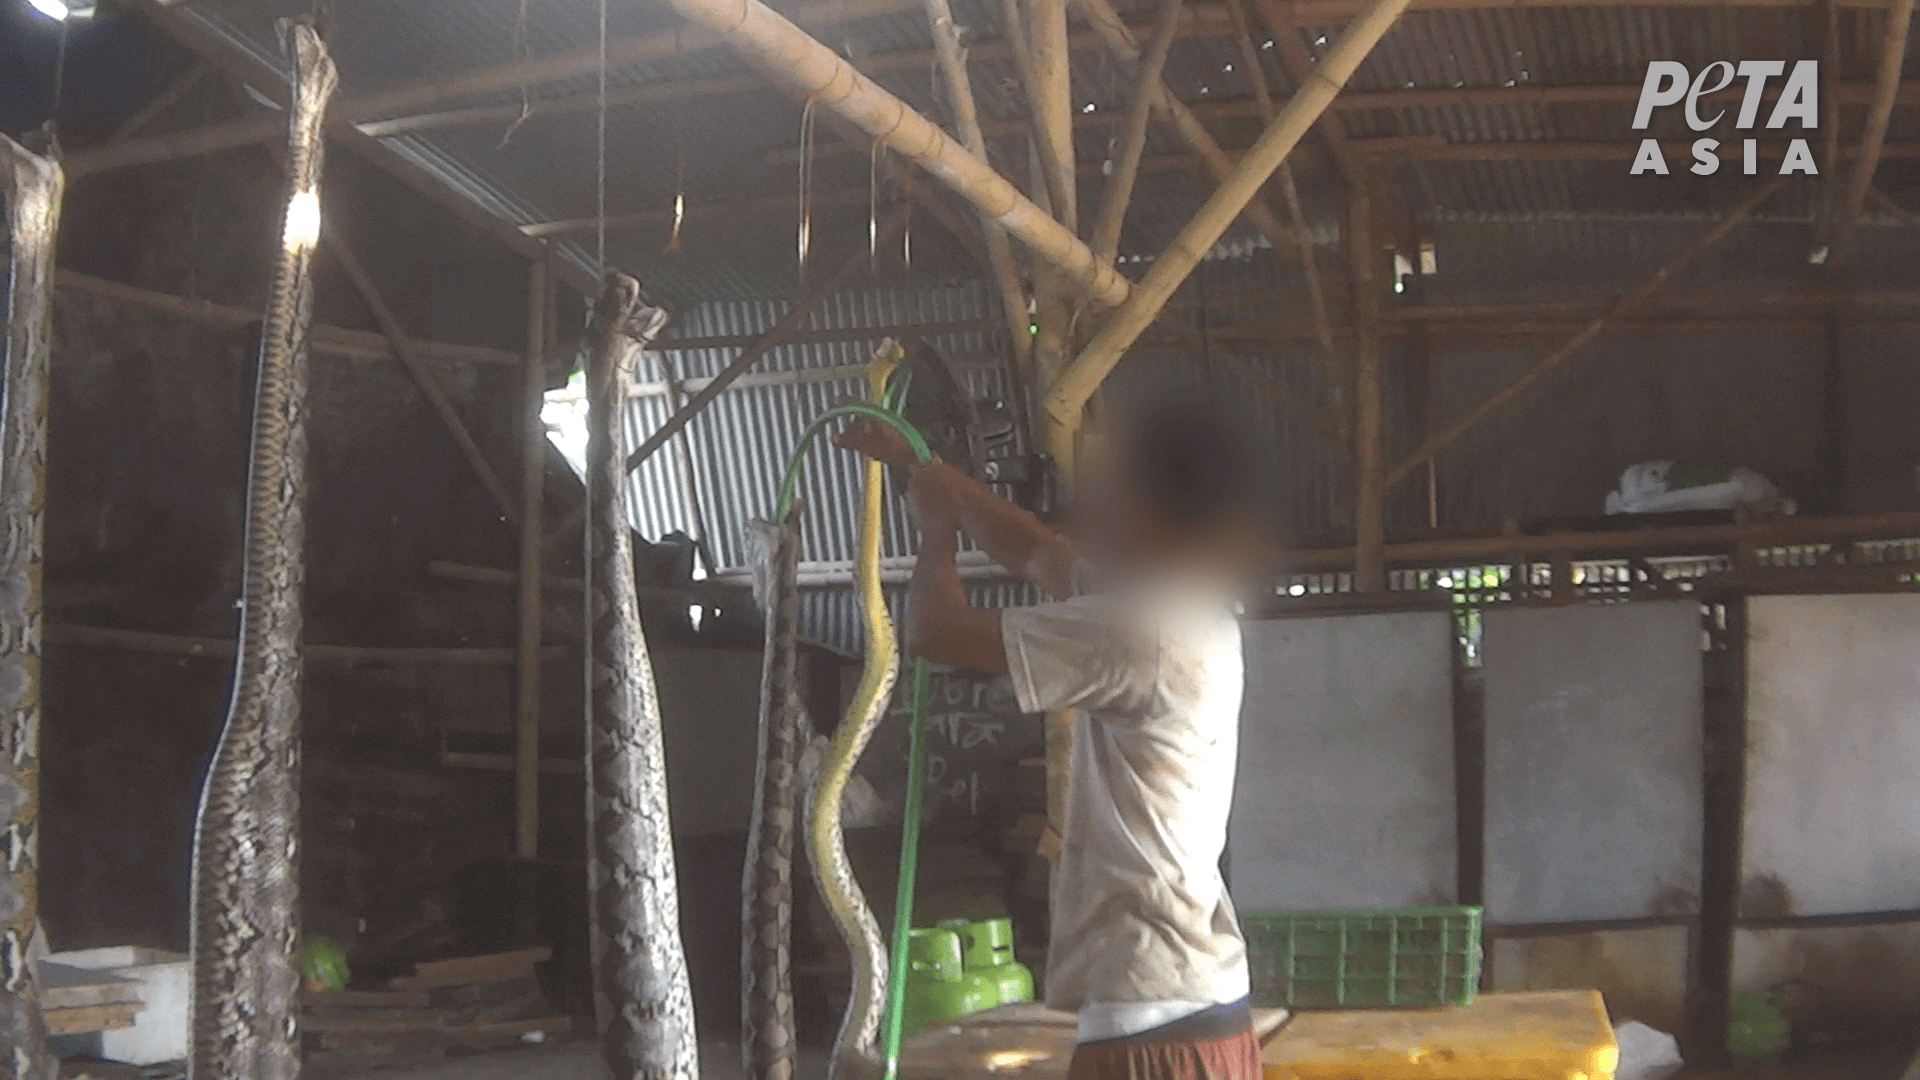 Worker inflating python at slaughterhouse supplying LVMH